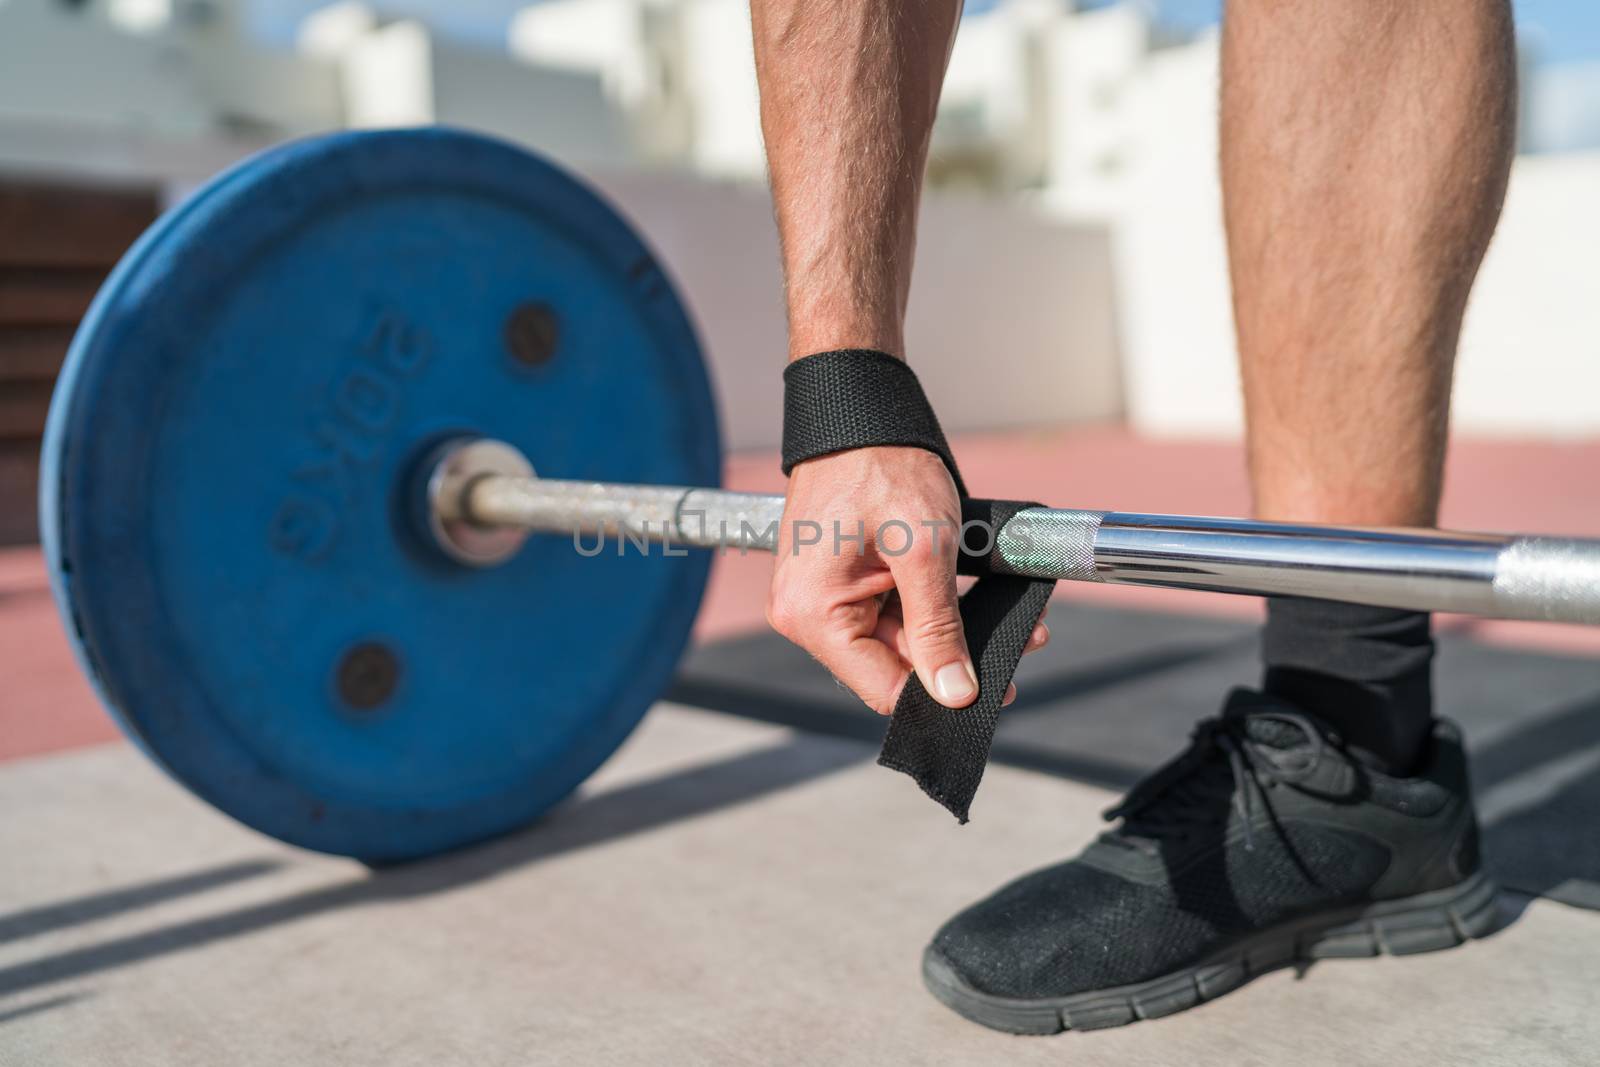 Weightlifting wrist straps support for bodybuilding and powerlifting. Fitness man wearing accessory during barbell weight lifting deadlift exercise workout at gym. Closeup of hand and bar.